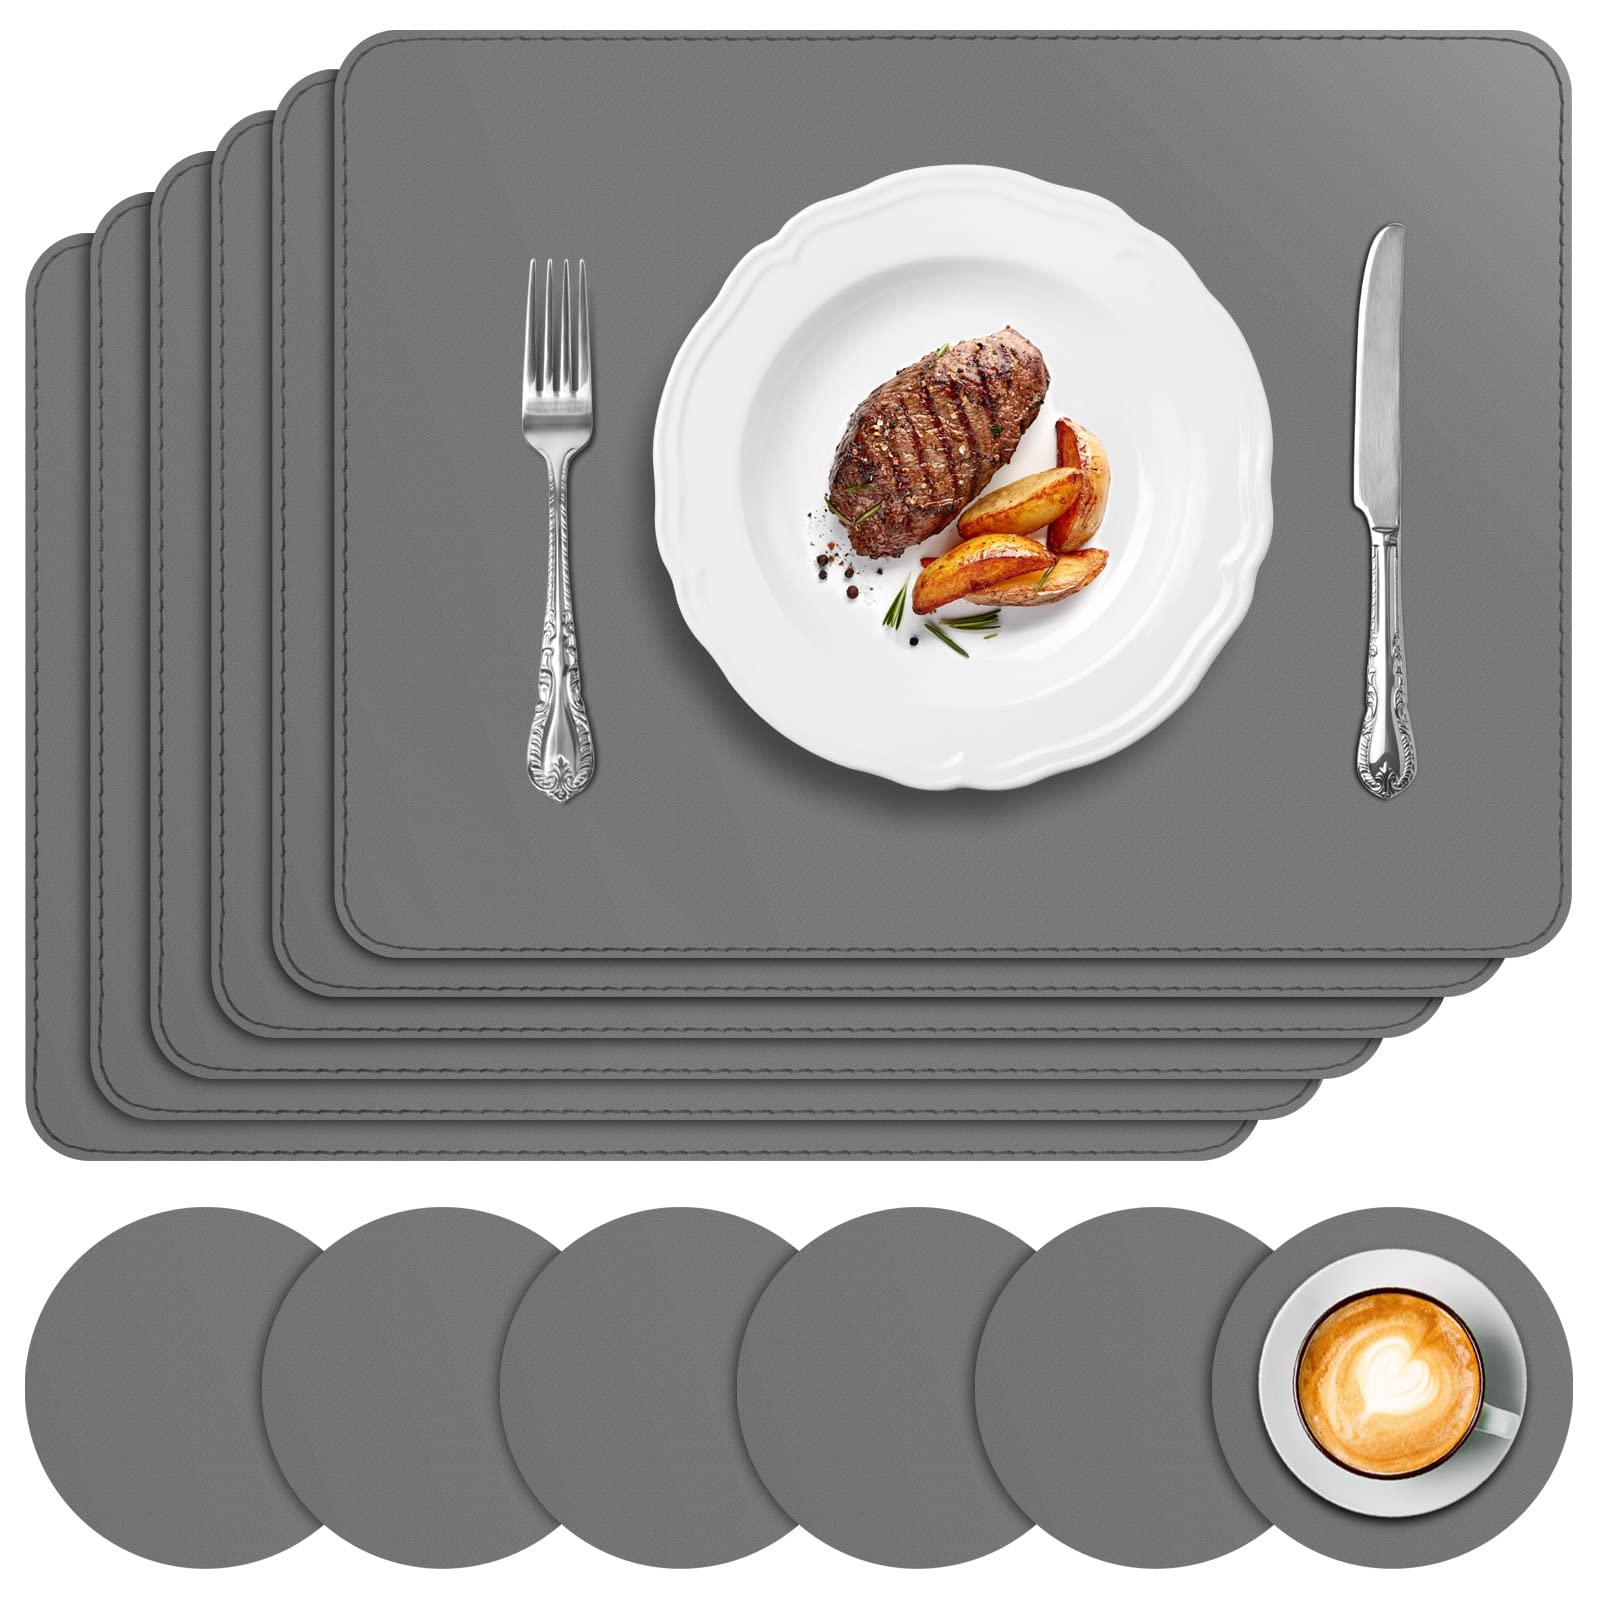 APLKER Placemats and Coasters Set of 6, Heat Insulation PU Leather Table Mats Non-Slip Washable Waterproof Kitchen Dining Place Mats for Home Restaurant Hotel, Grey